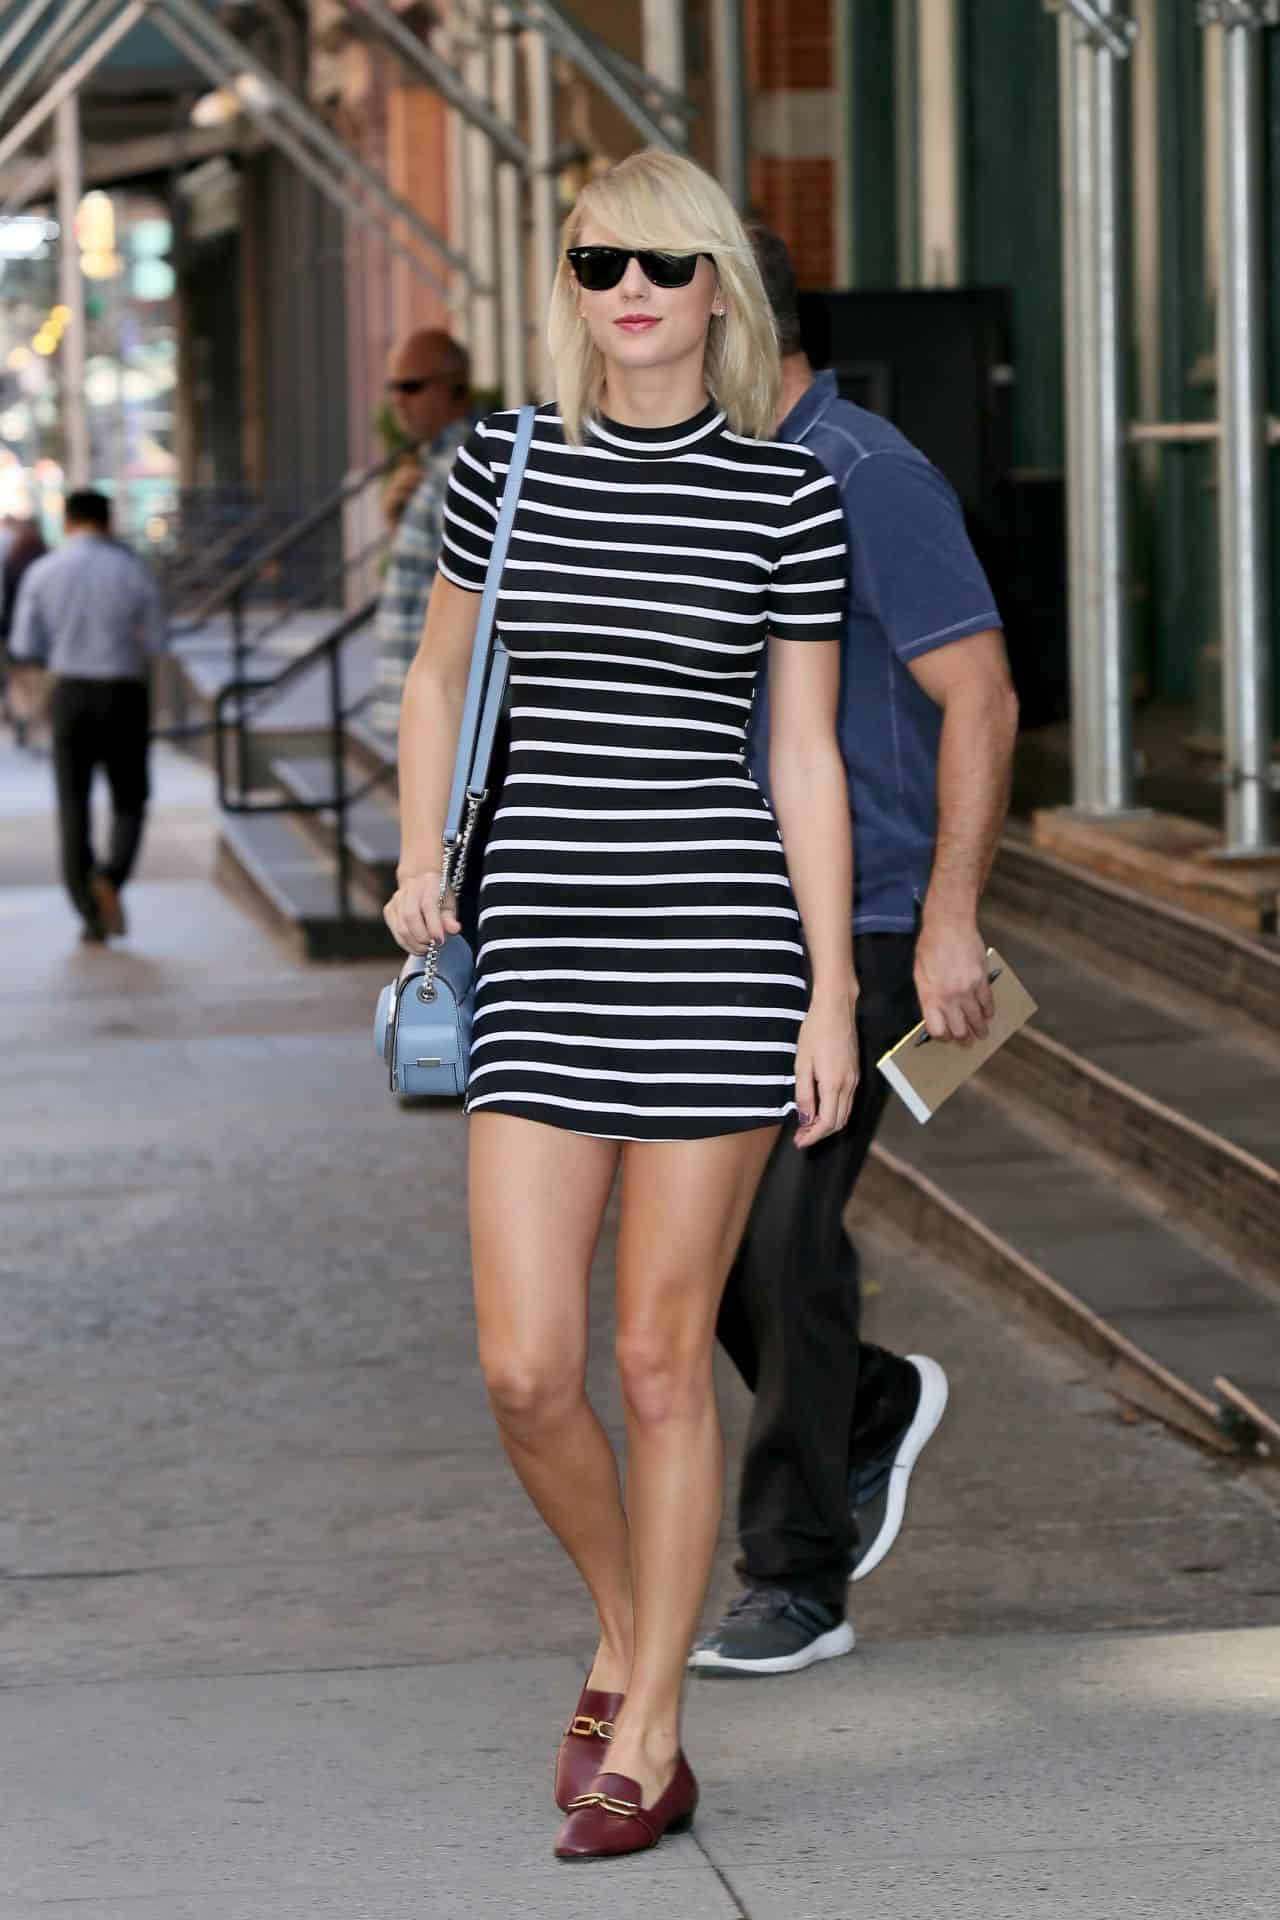 Taylor Swift Steps Out in NYC in Sleek Black and White Striped Dress